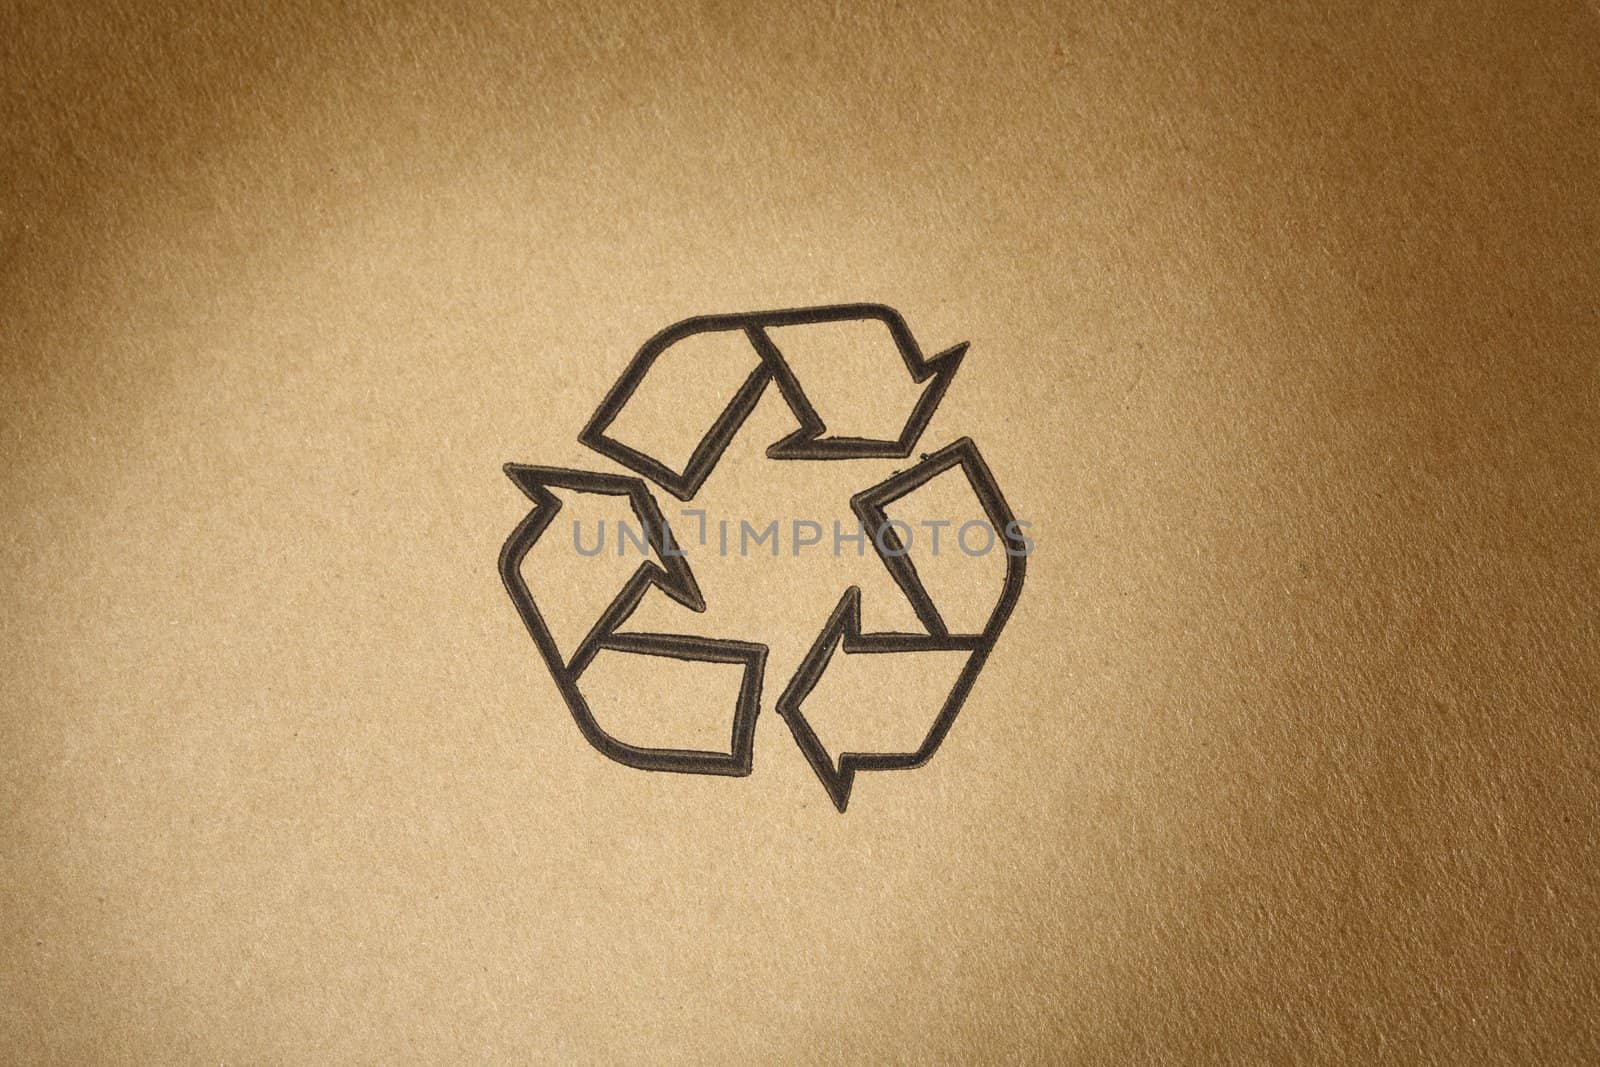 "Recyclable" universal symbol, printed on brown cardboard